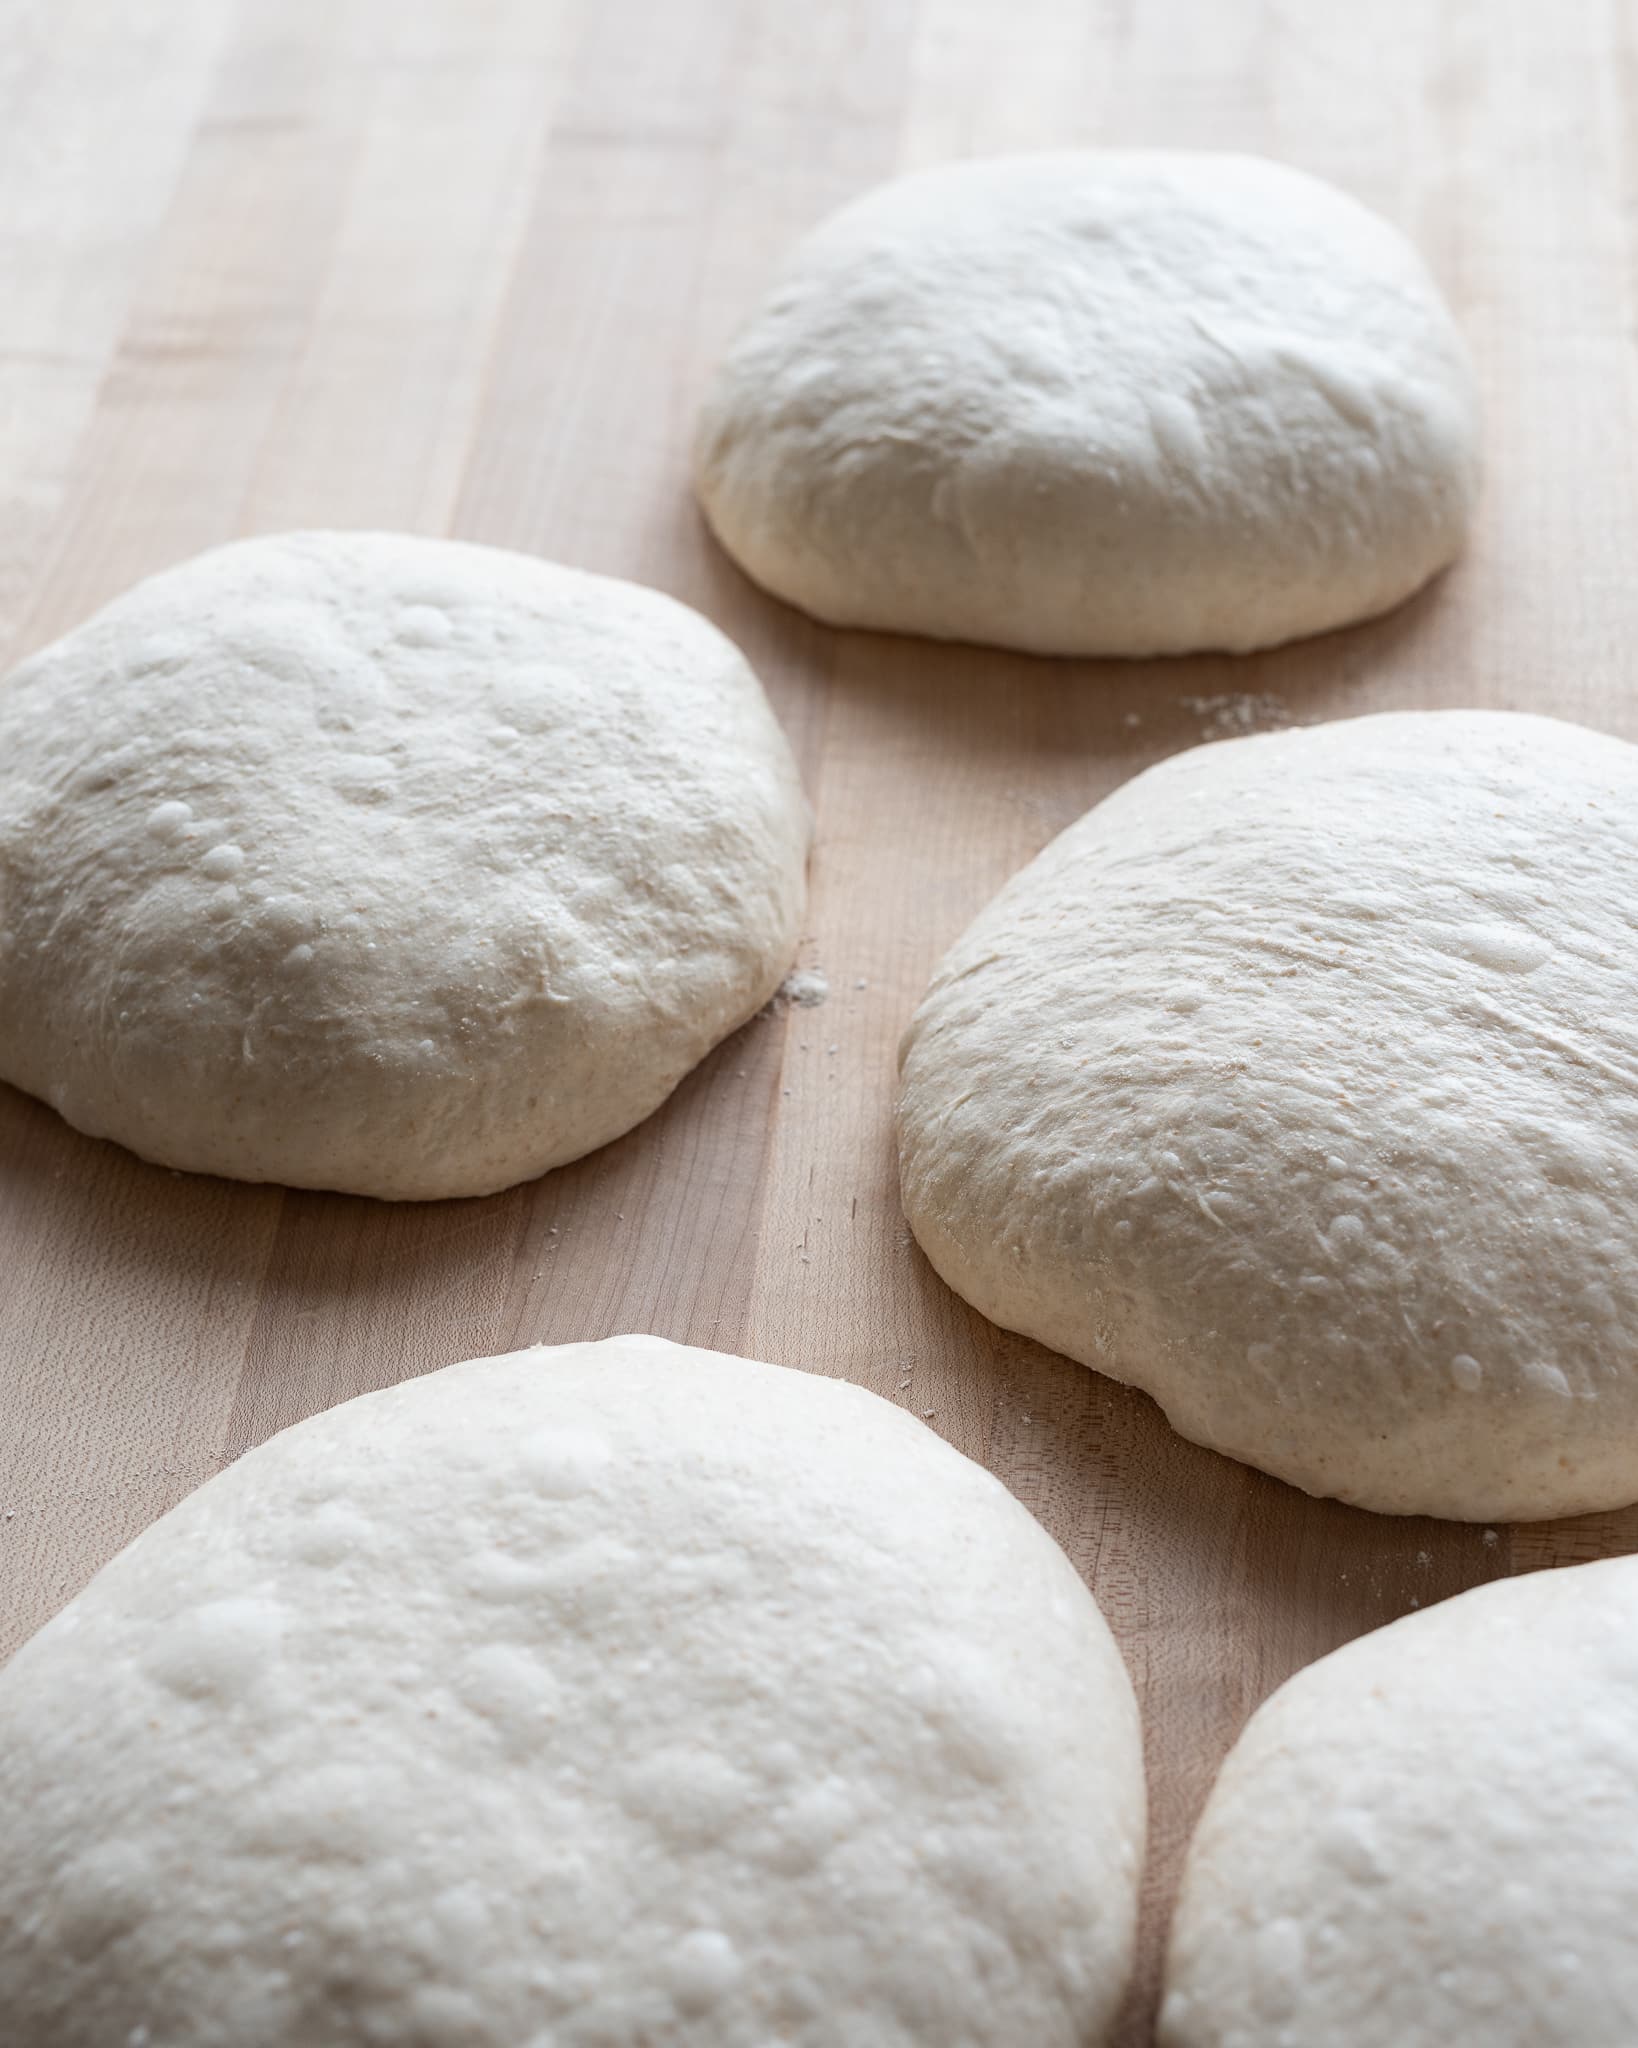 how to preshape bread dough, five preshaped rounds